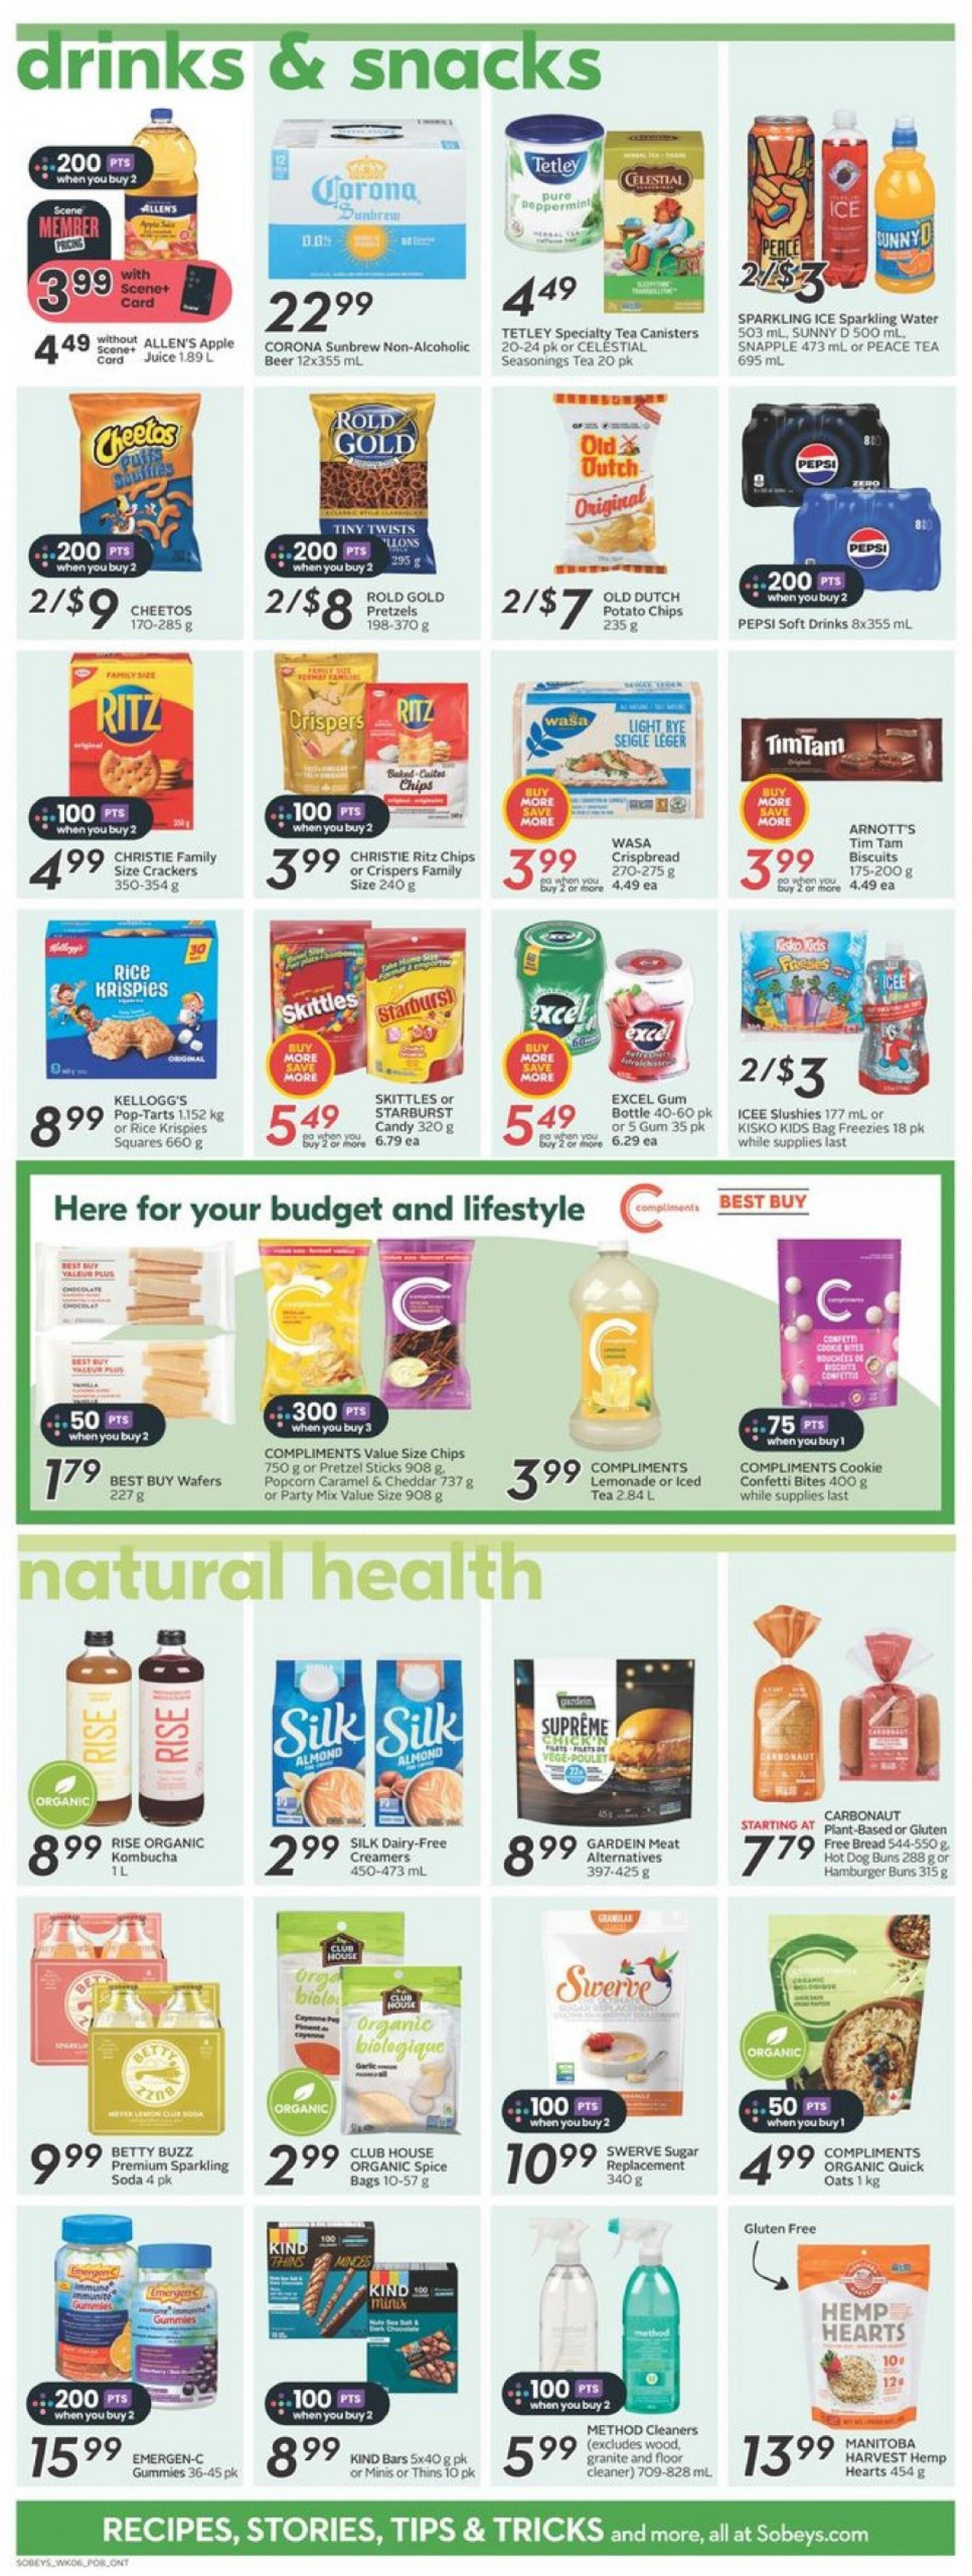 sobeys - Sobeys - Weekly Flyer - Ontario flyer current 06.06. - 12.06. - page: 16